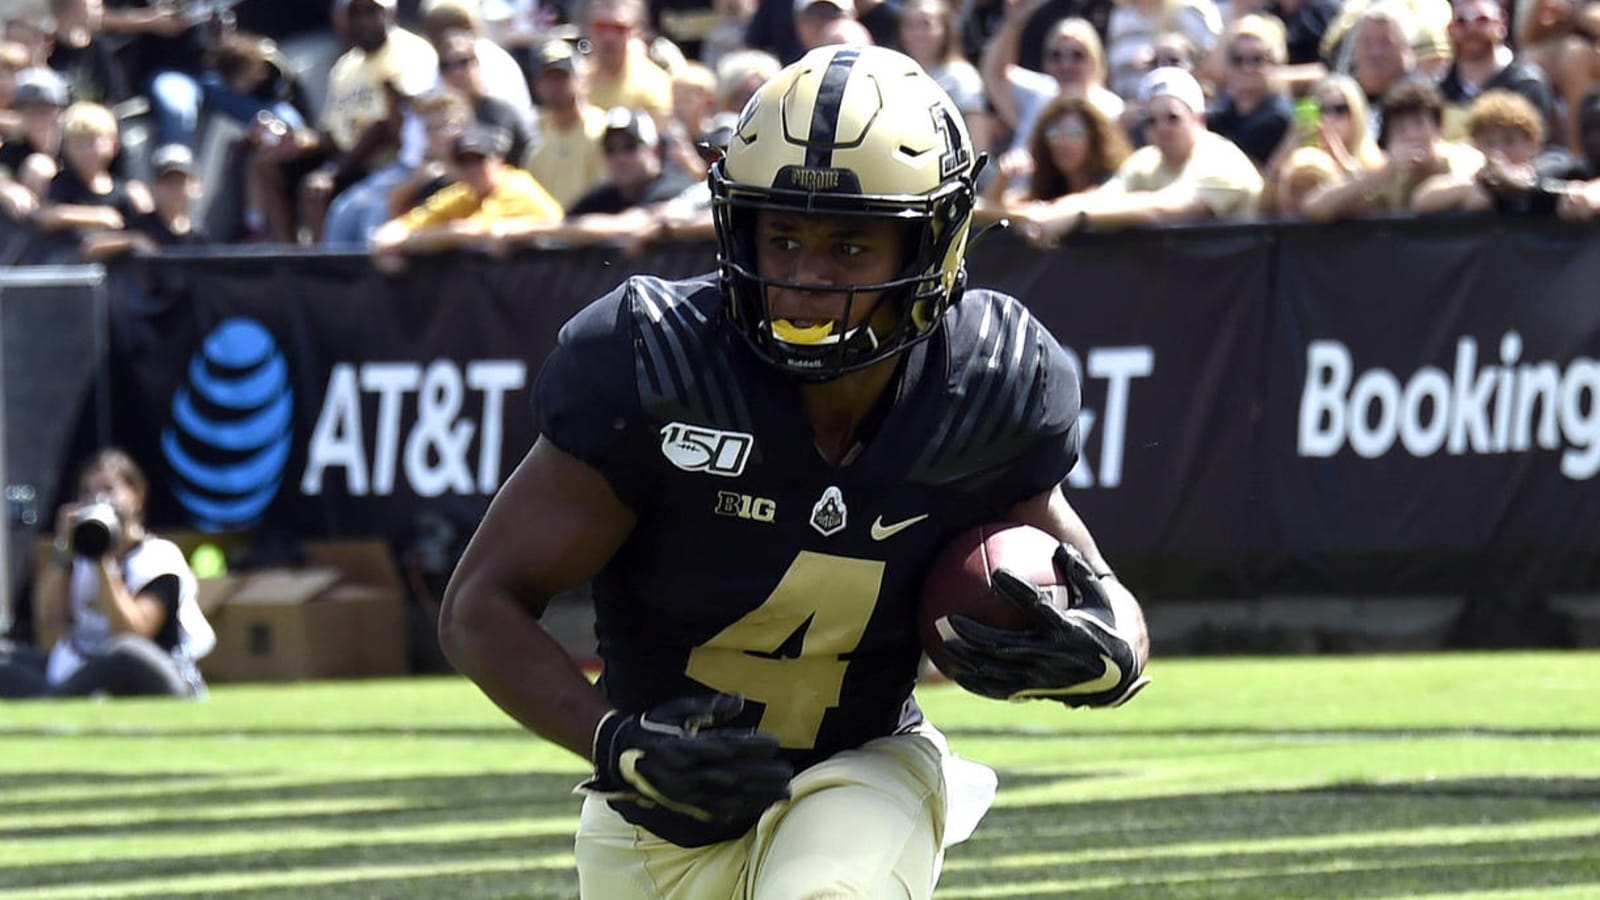 Purdue's Rondale Moore opts back in, will play this fall